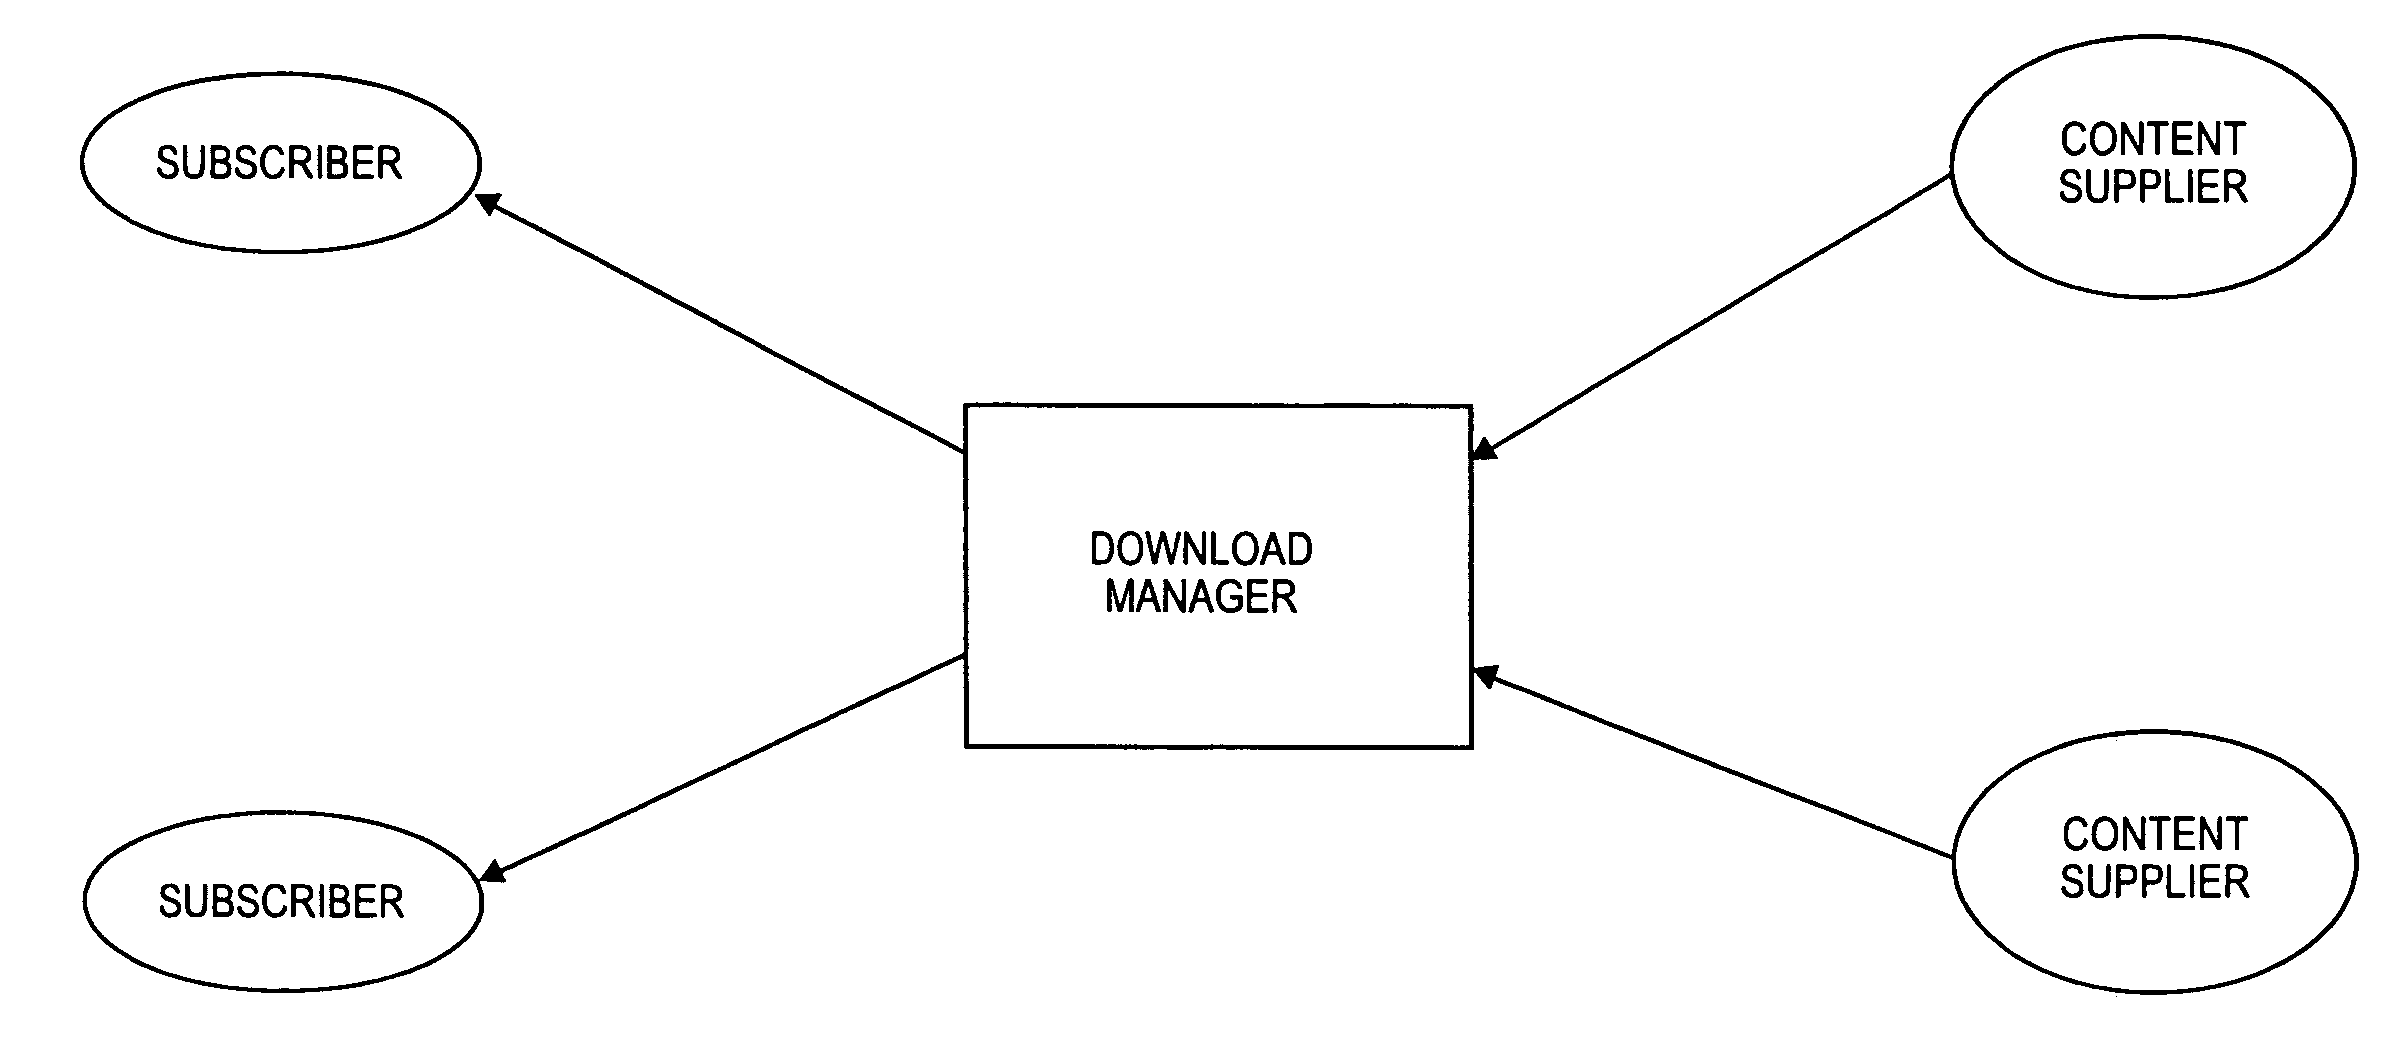 Device capability based discovery, packaging and provisioning of content for wireless mobile devices